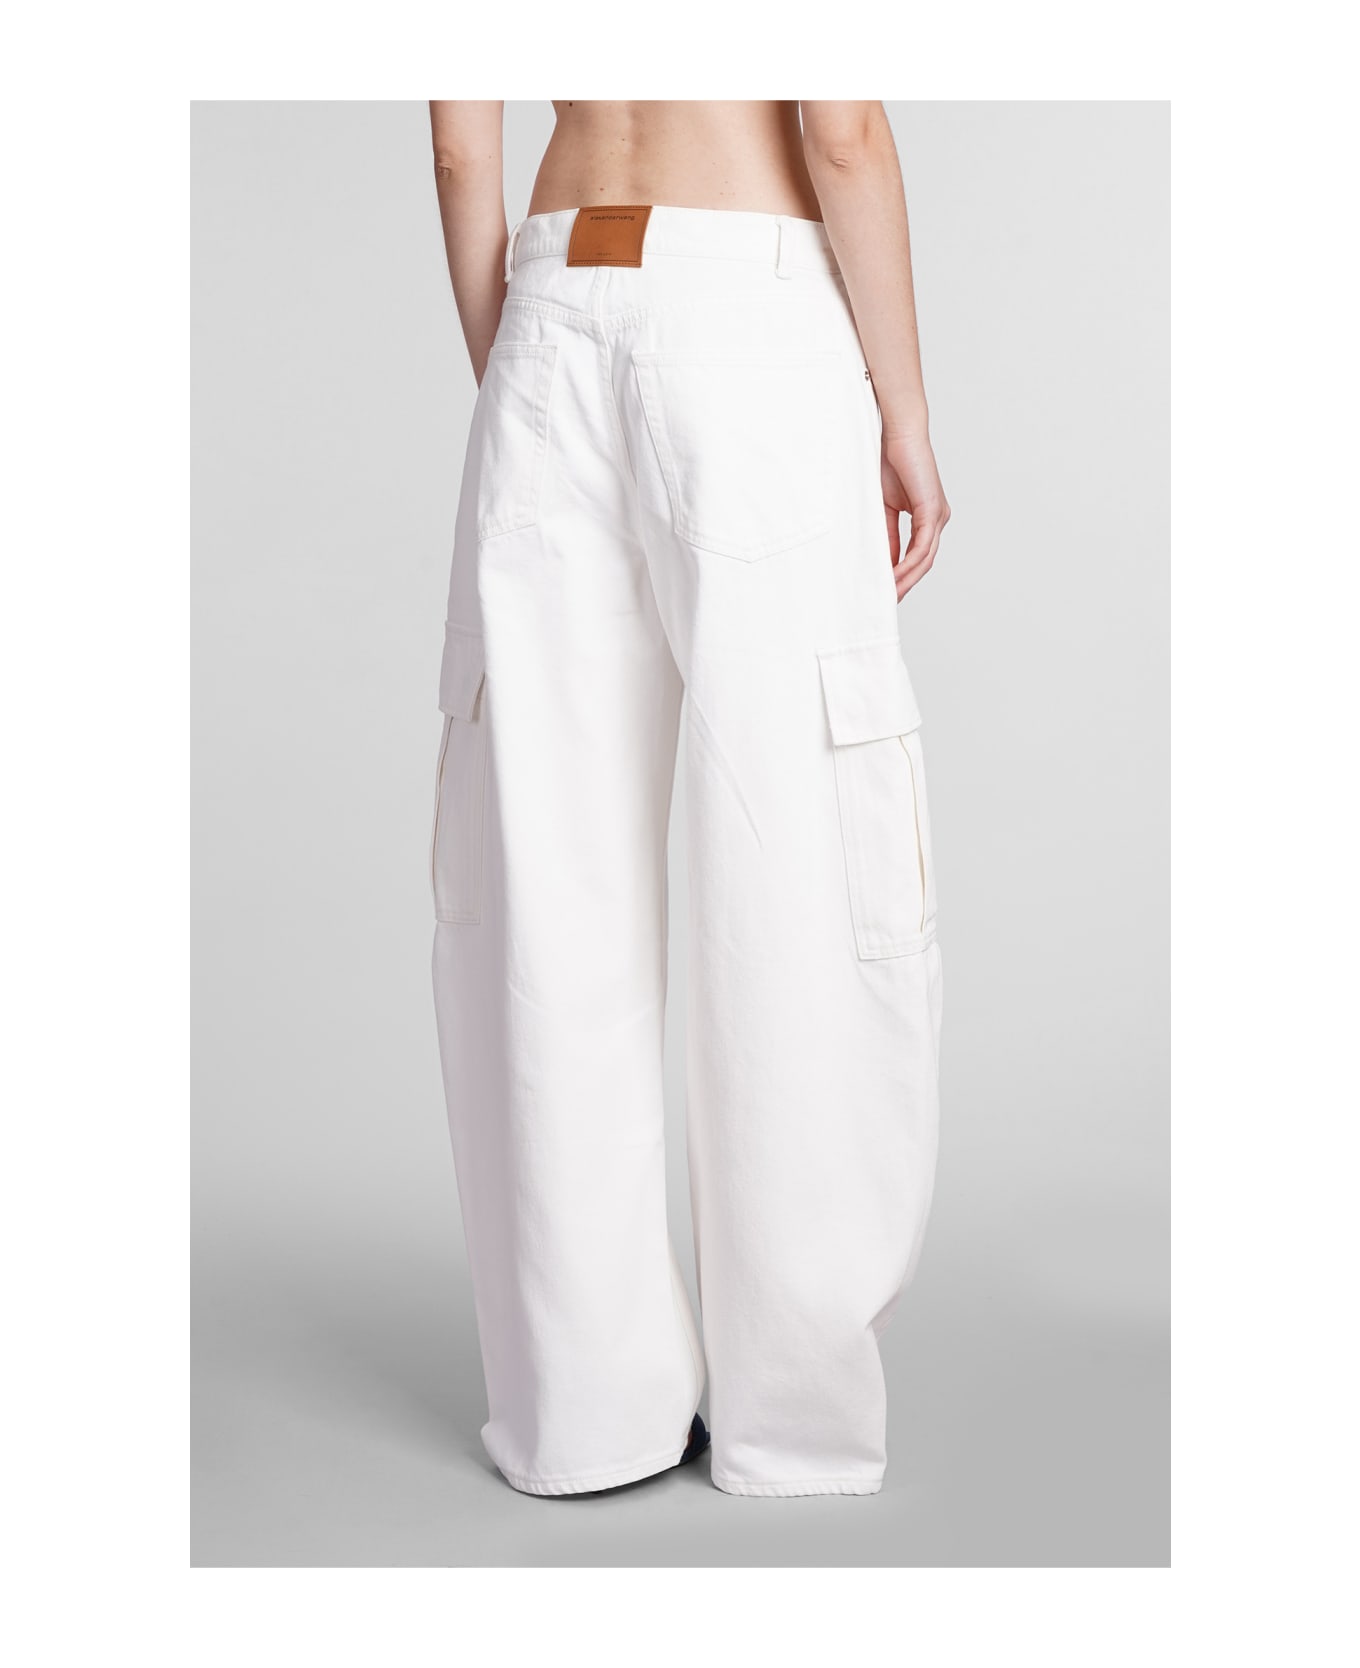 Alexander Wang Jeans In White Cotton - white